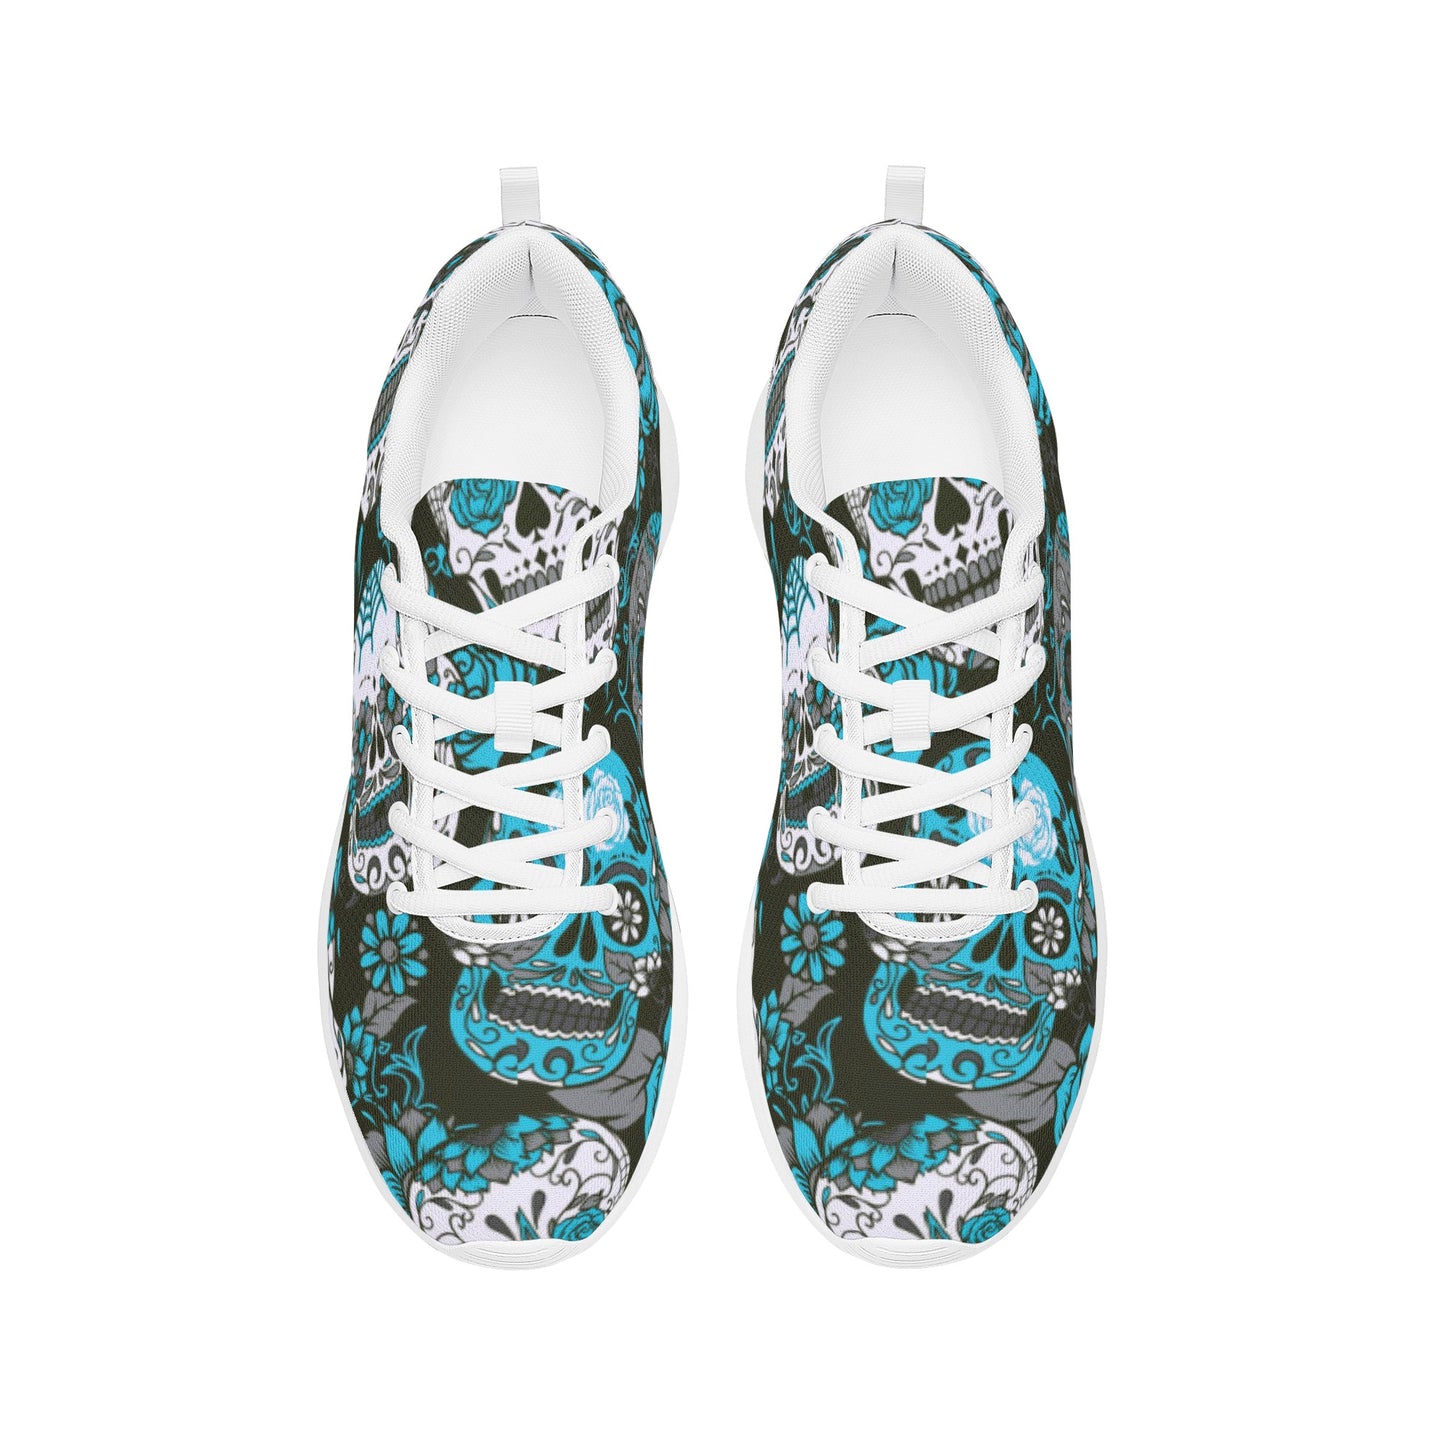 Sugar skull day of the dead Women's Mesh Athletic Sneakers